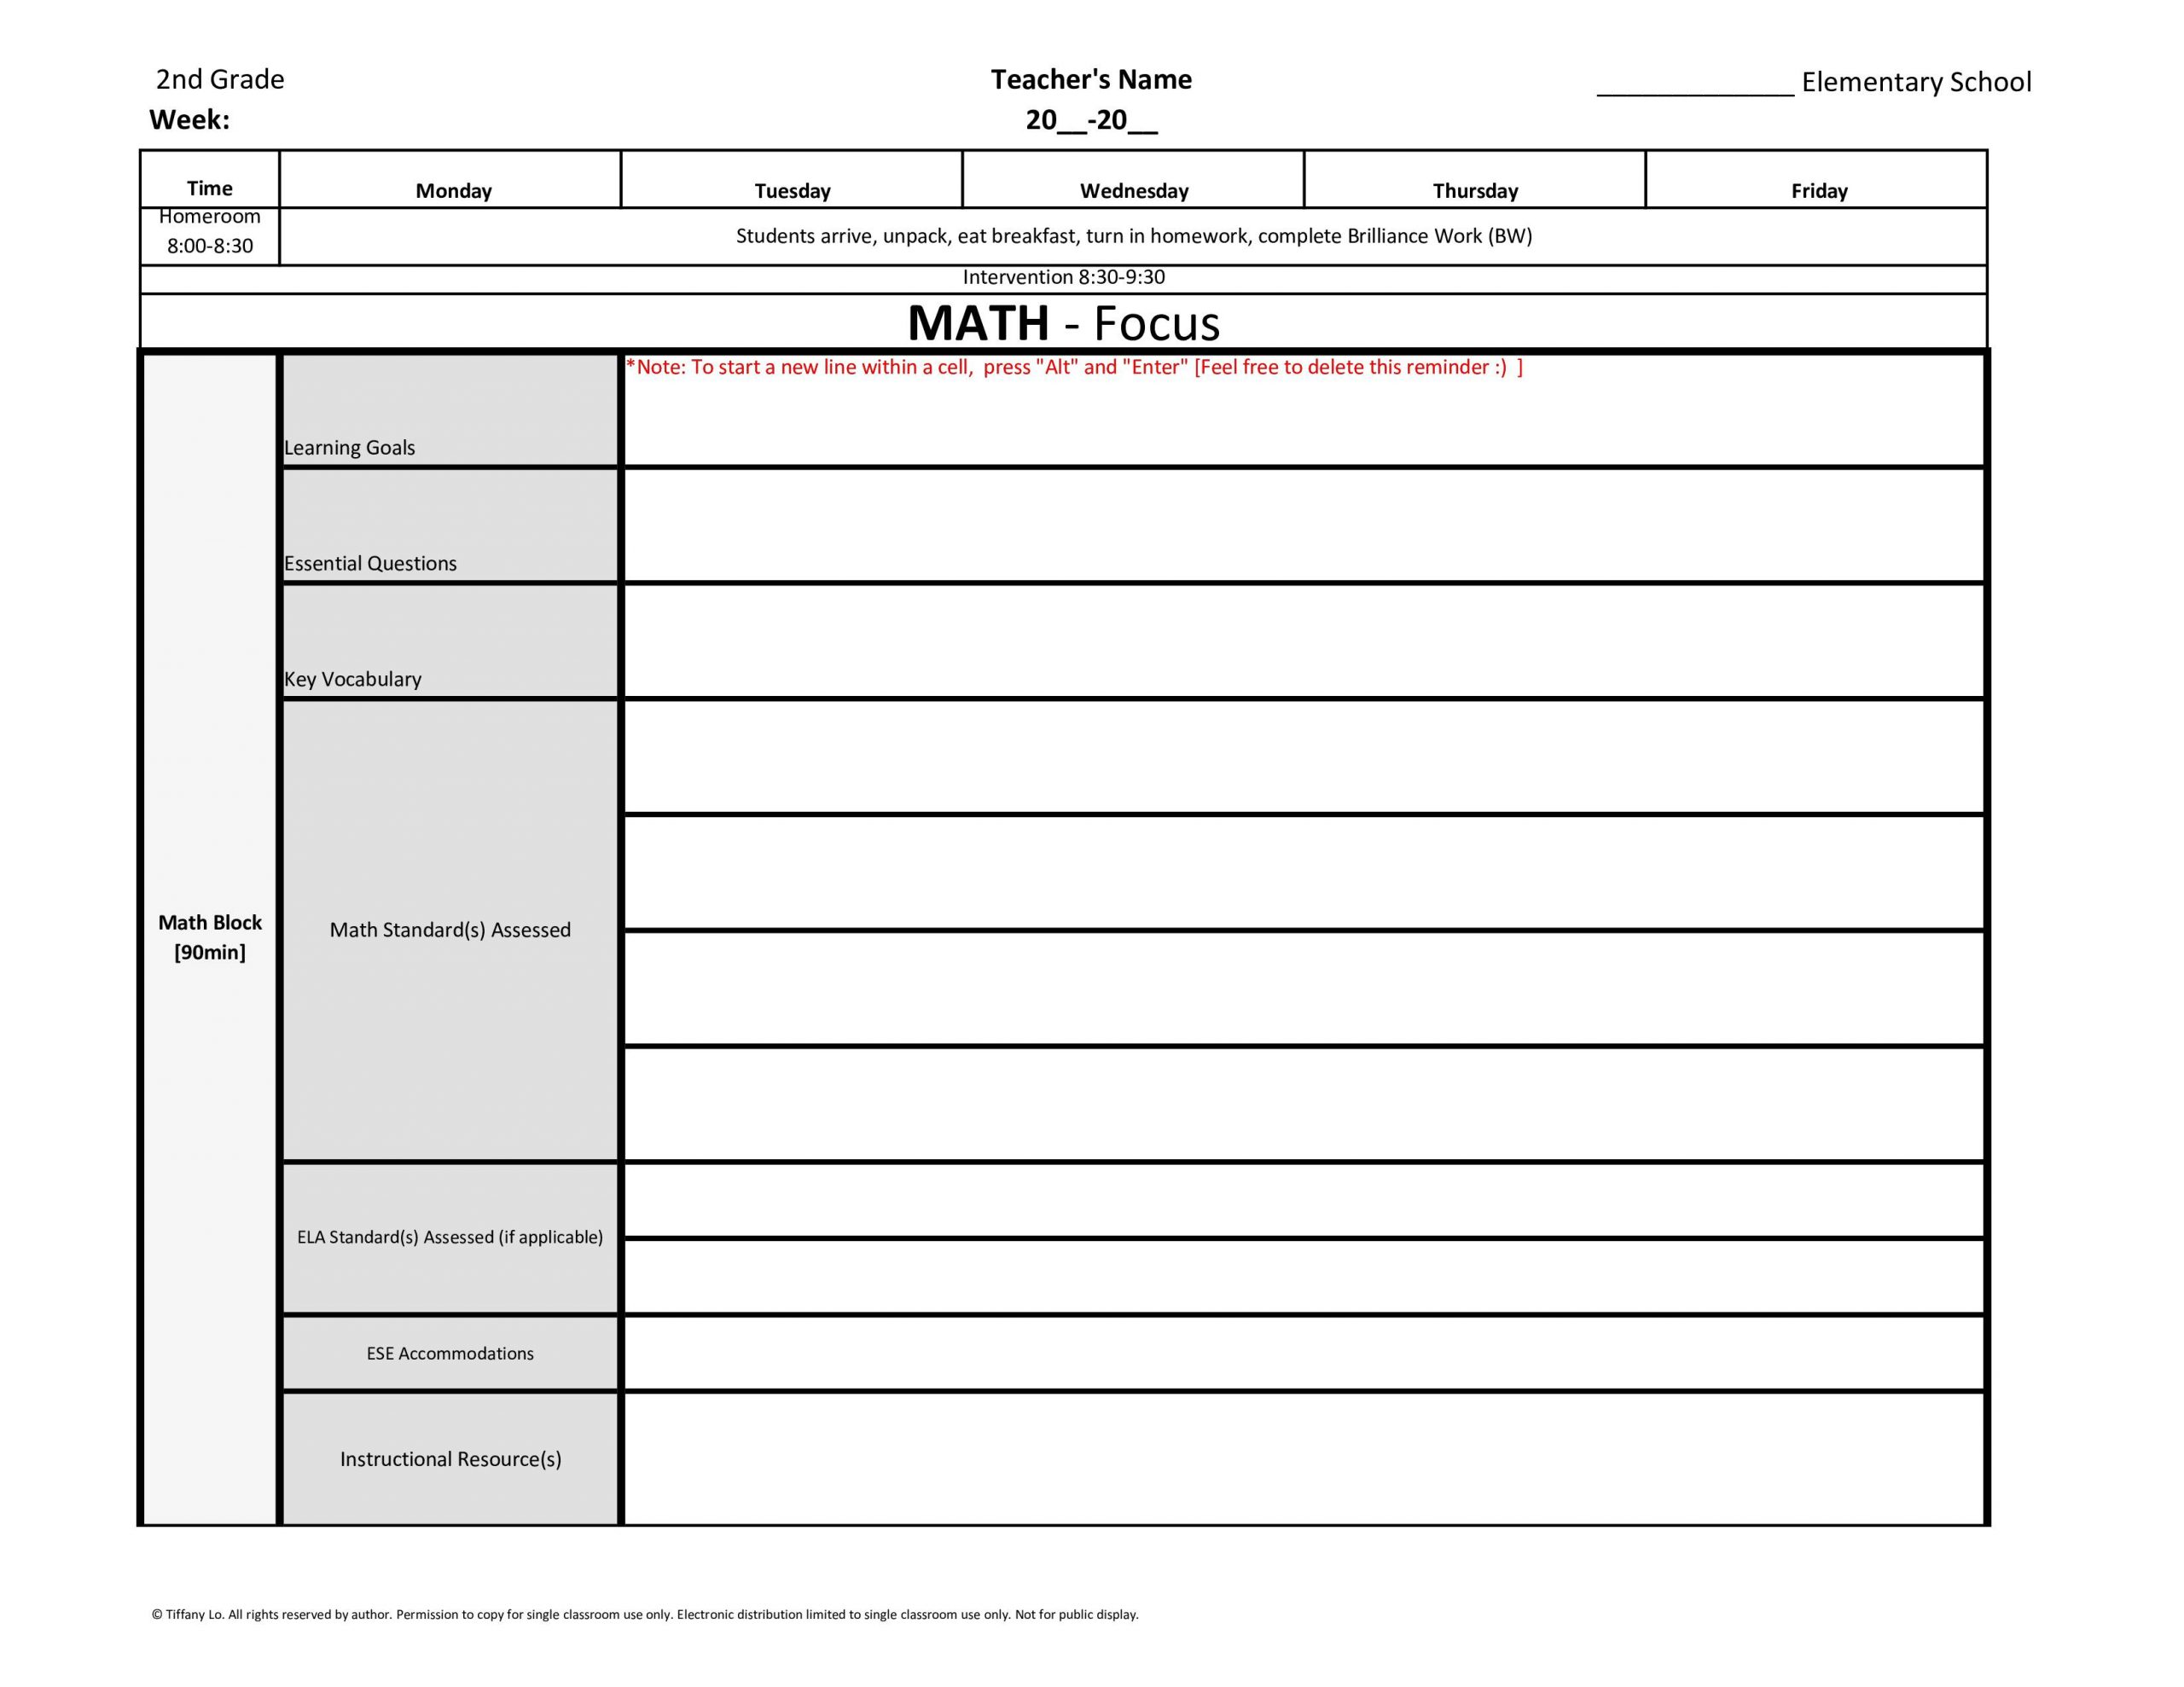 2Nd Second Grade Common Core Weekly Lesson Plan Template W/ Drop Down Lists